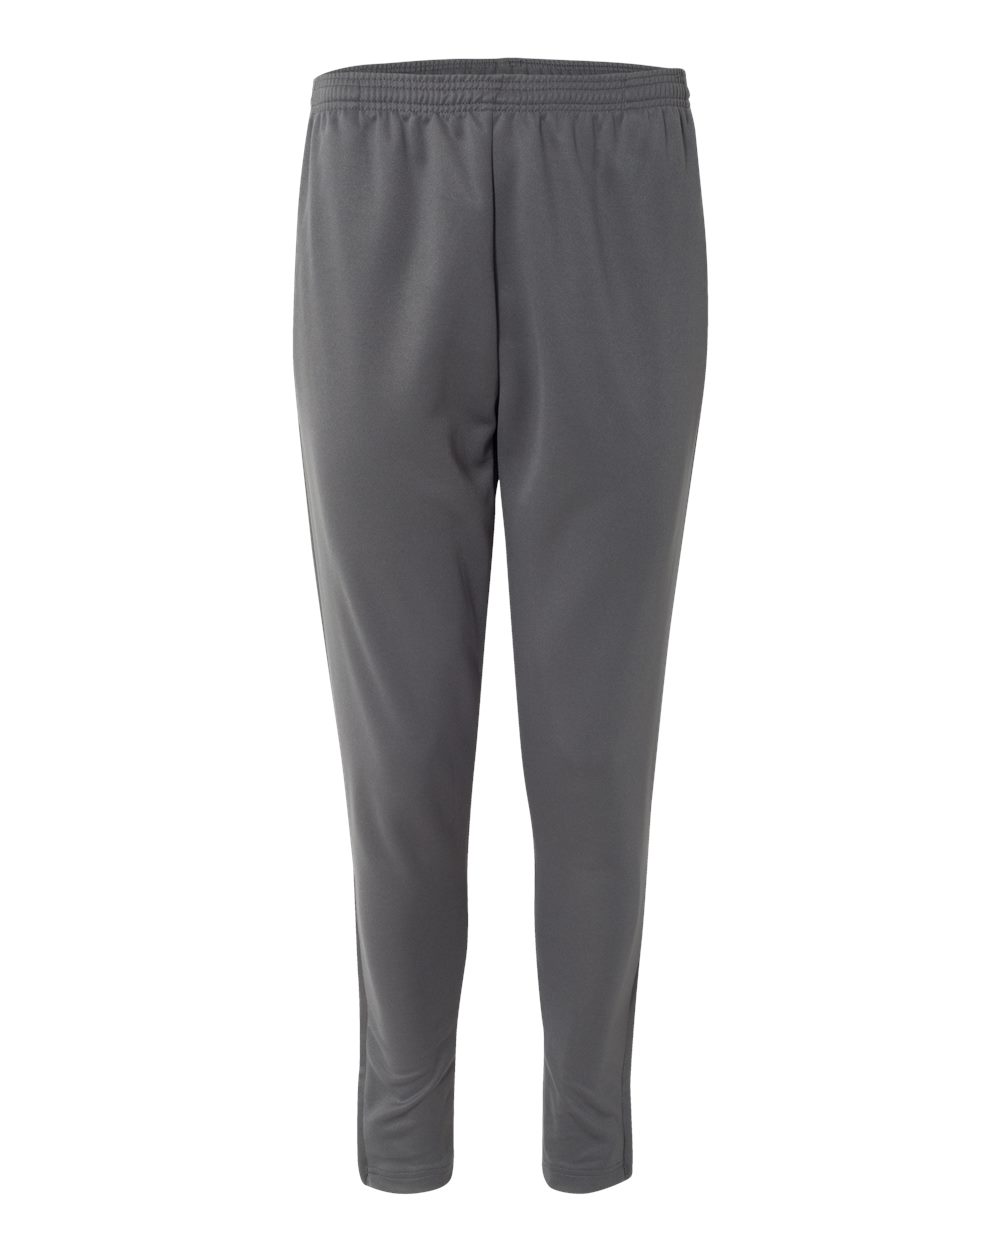 Unbrushed Polyester Trainer Pants-